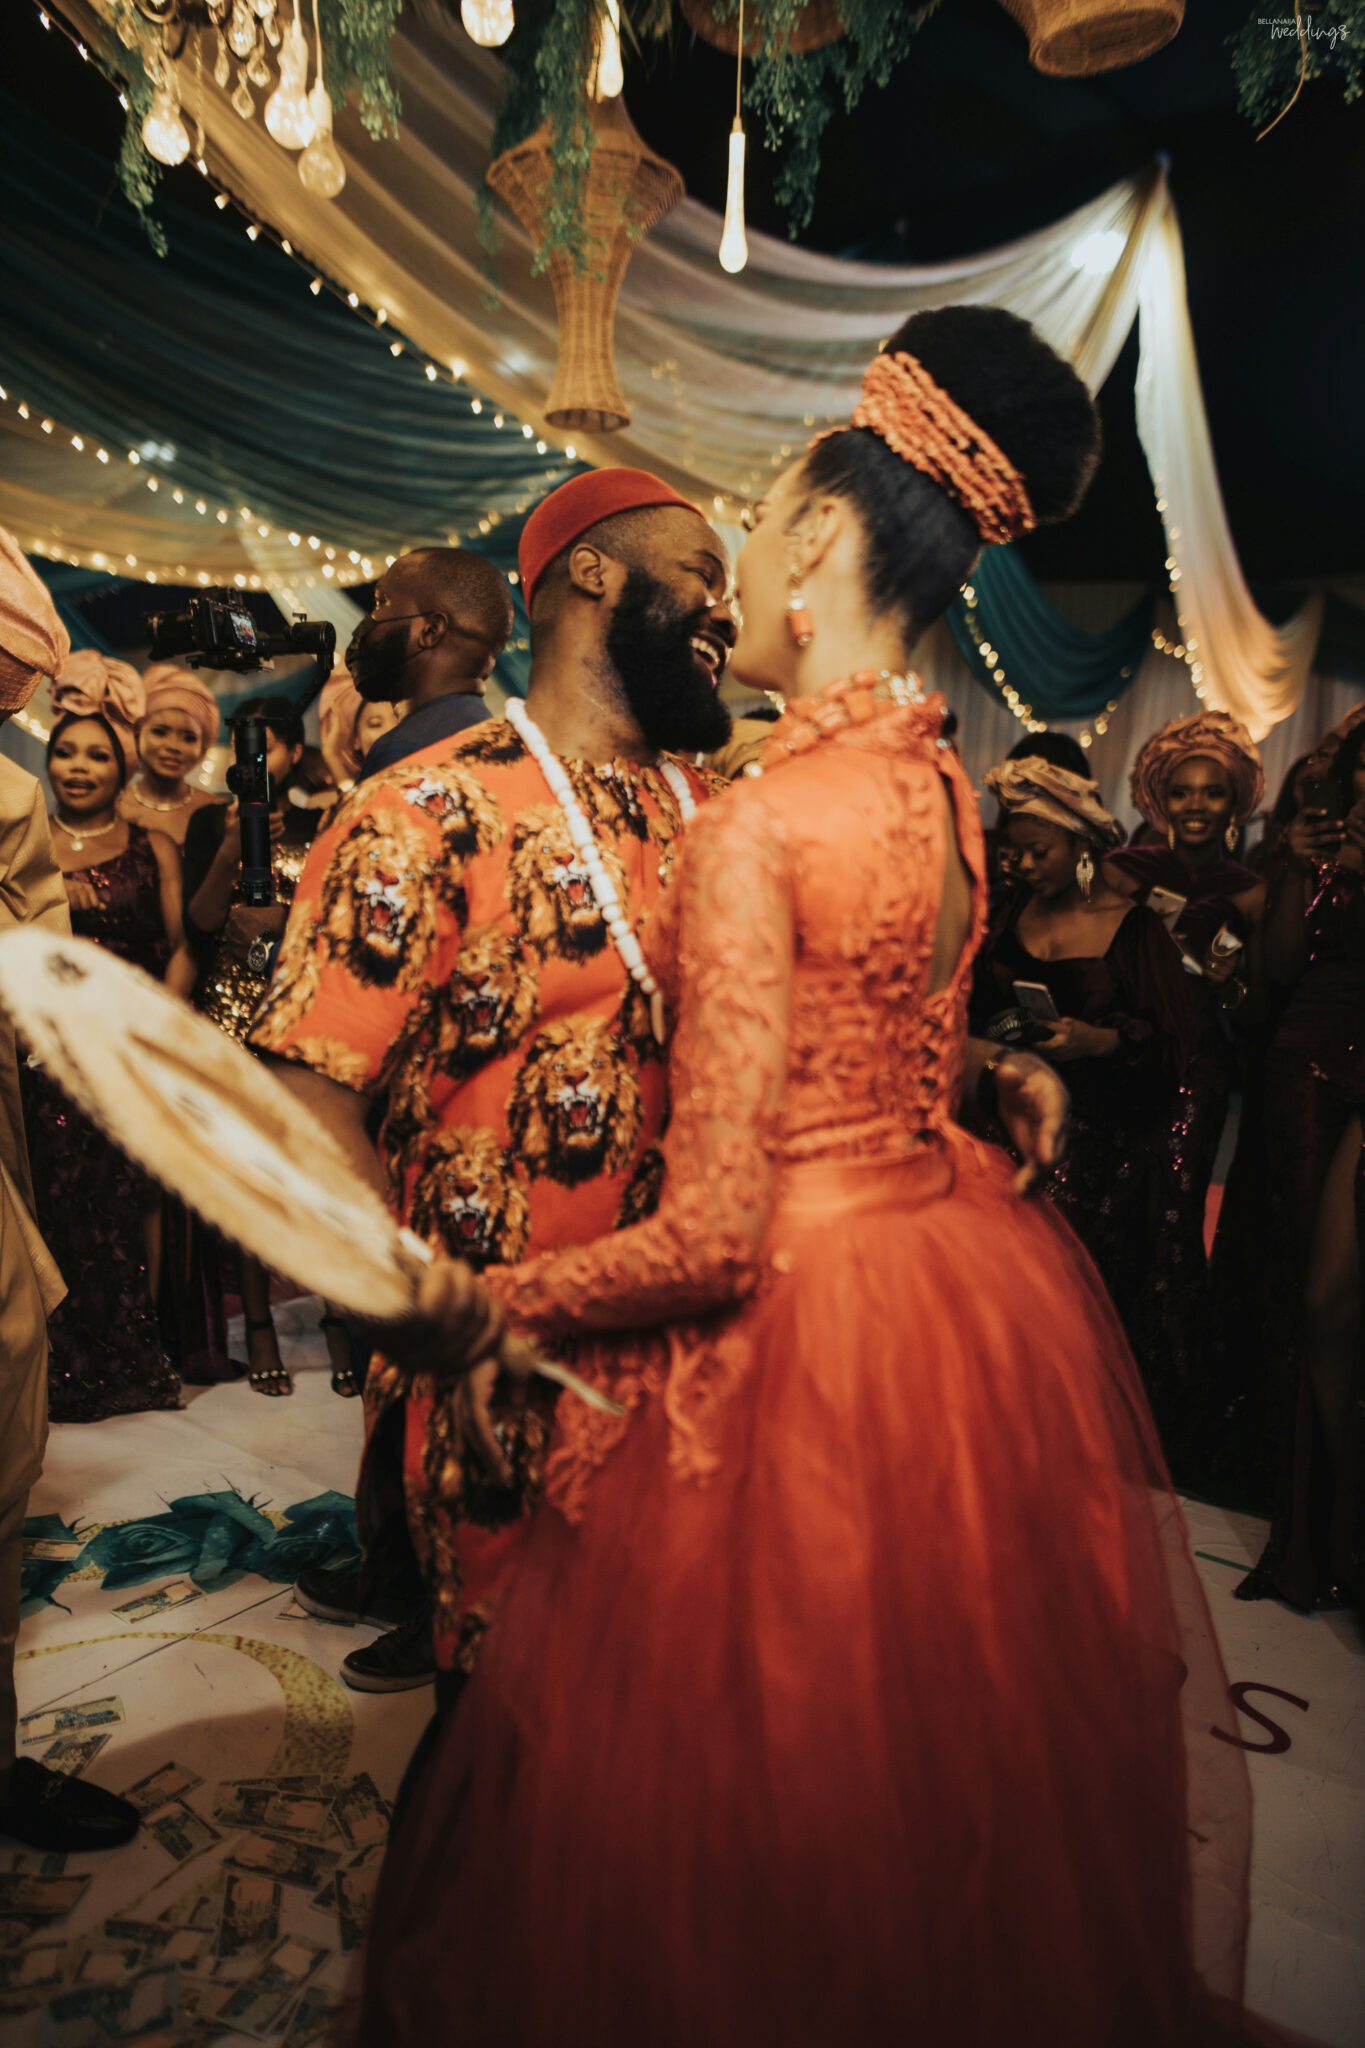 After Meeting On Instagram in 2018, this Igbo prince and his Yoruba princess tie the knot in a beautiful multicultural wedding ceremony 